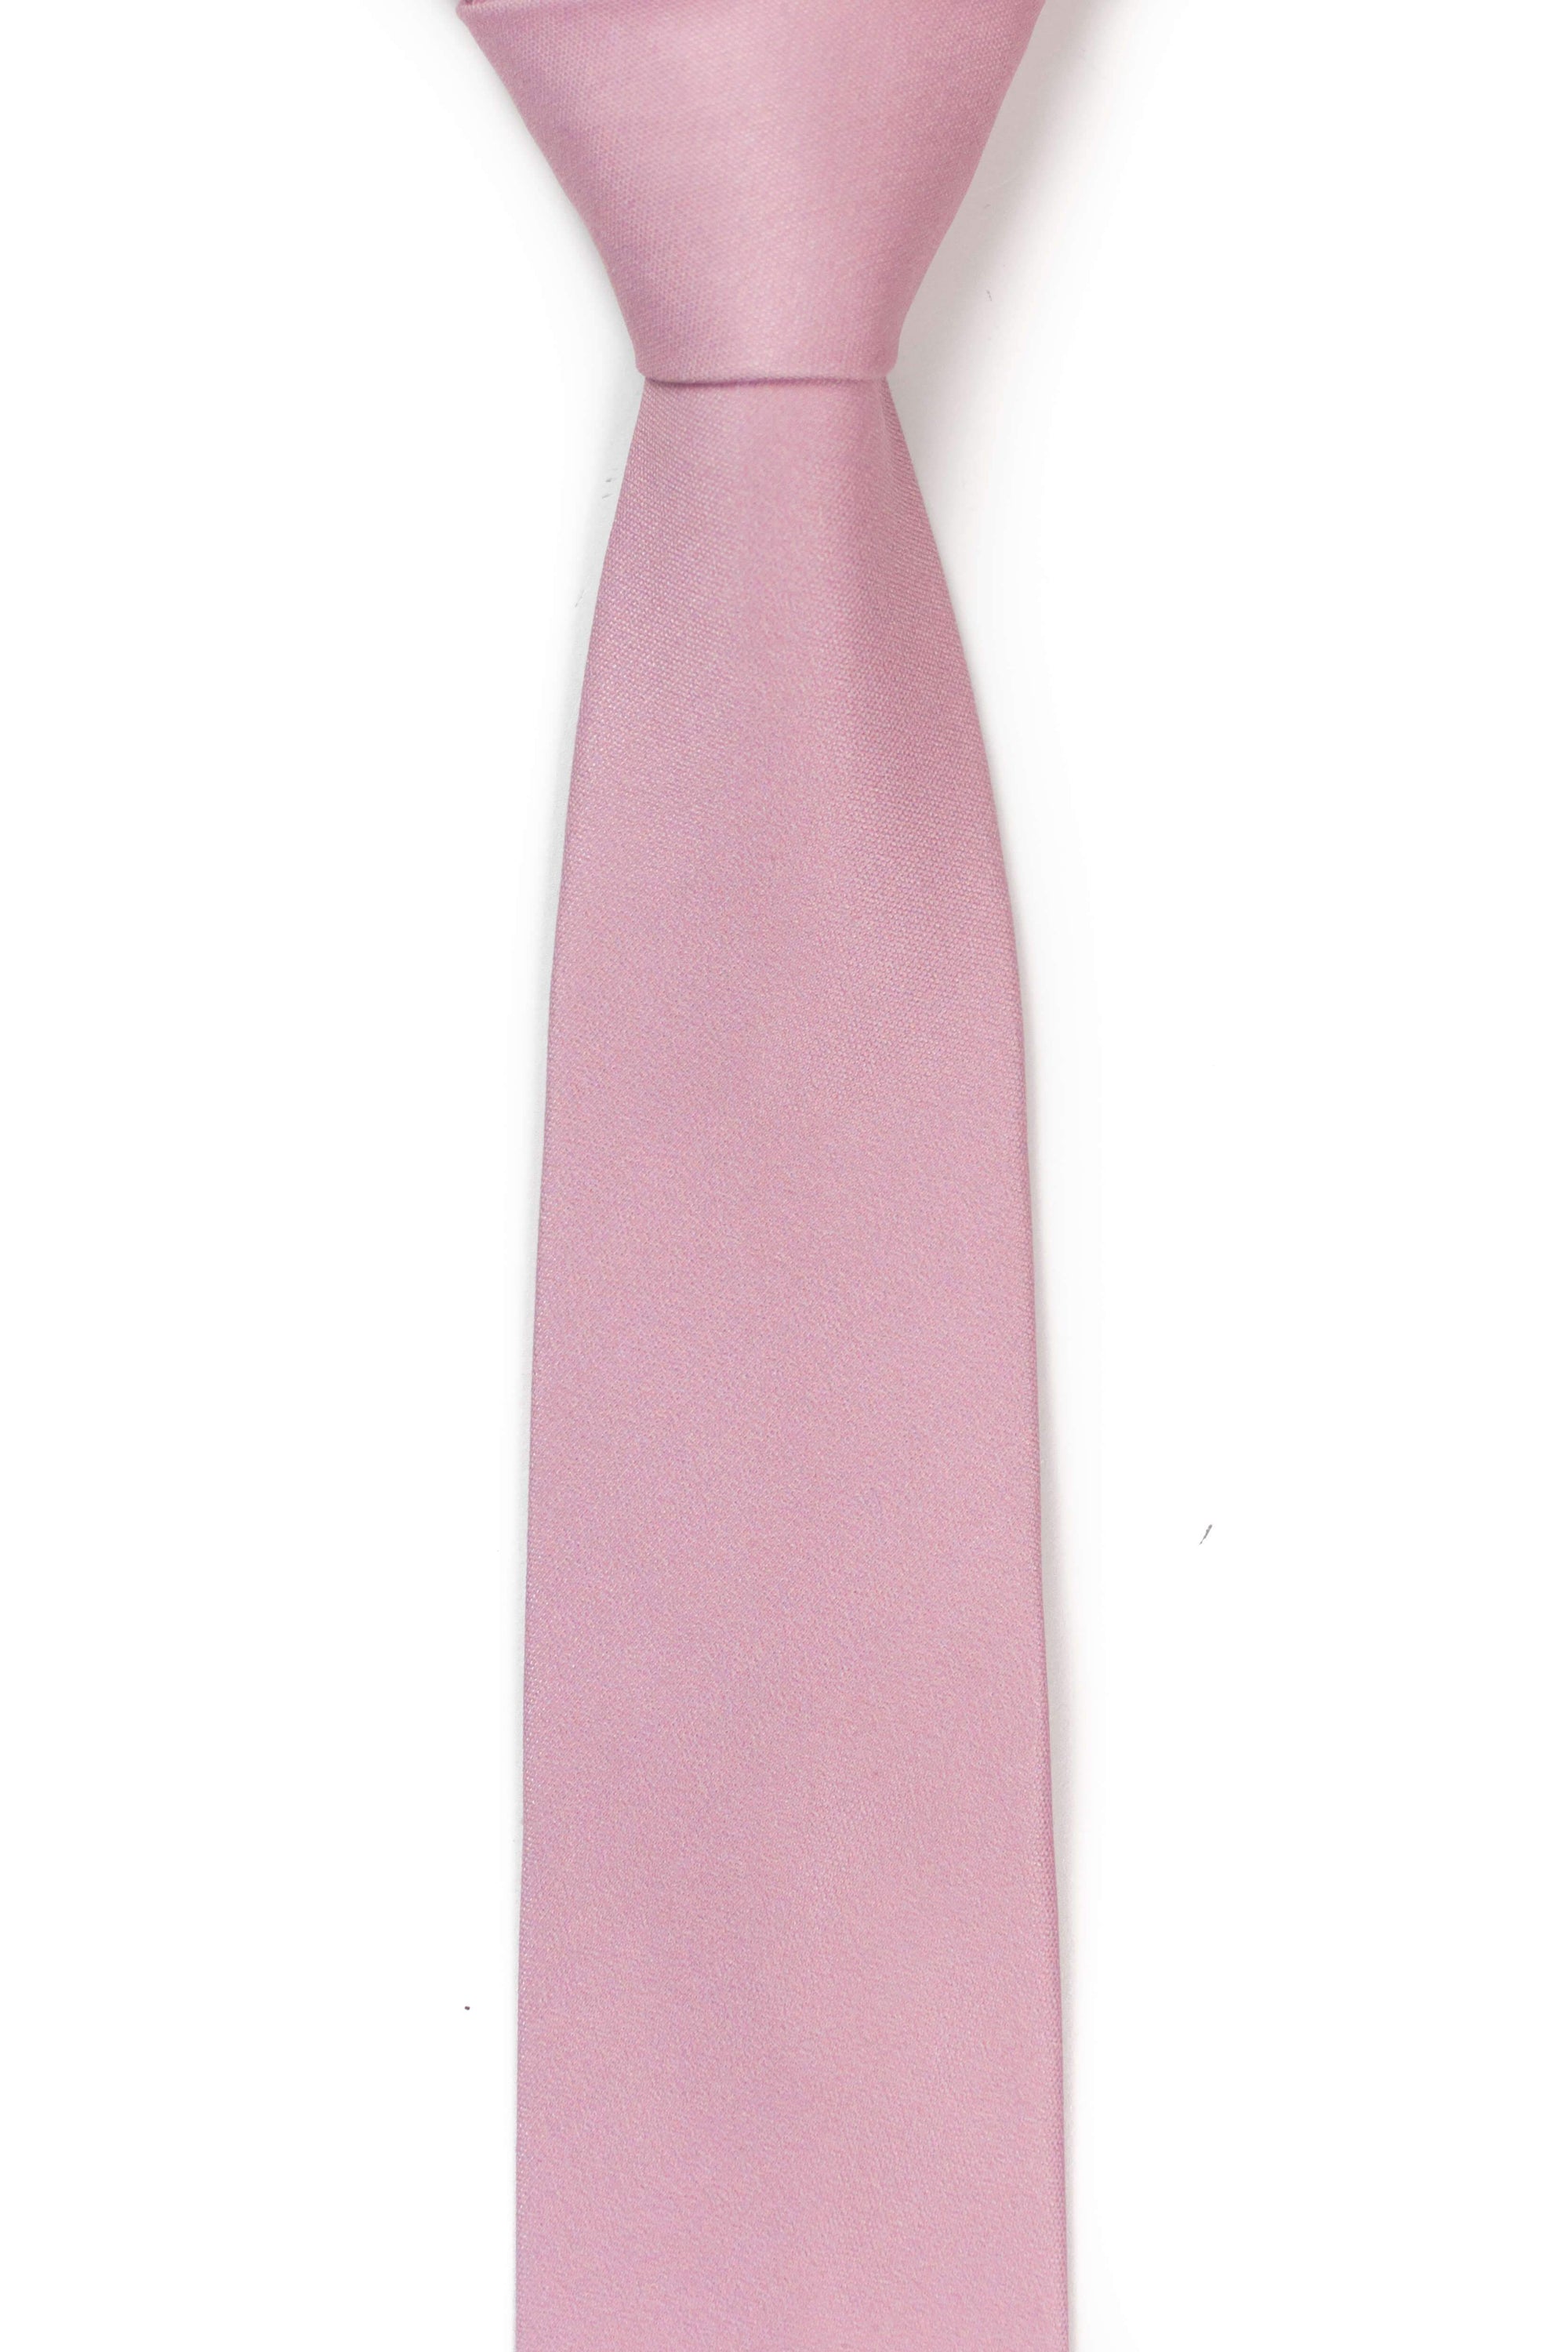 front view of mauve tie from tough apparel